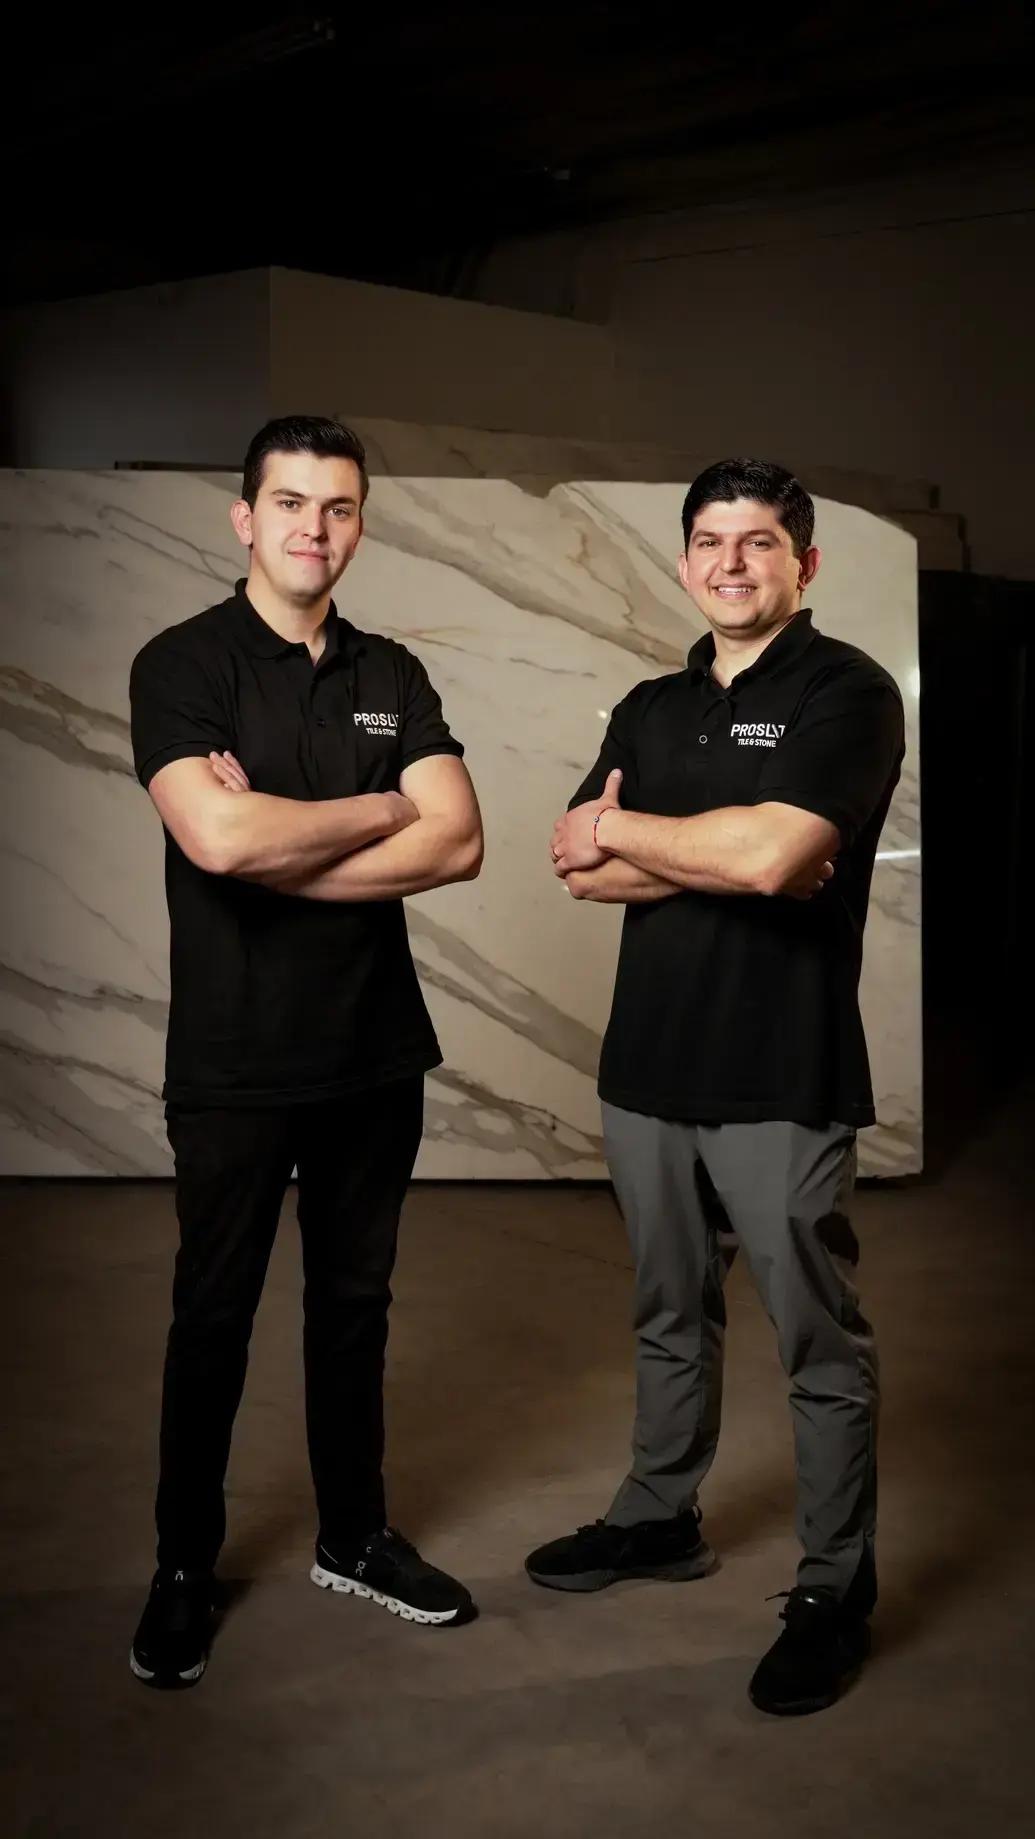 David and Irakli, the owners of Proslit Tile & Stone